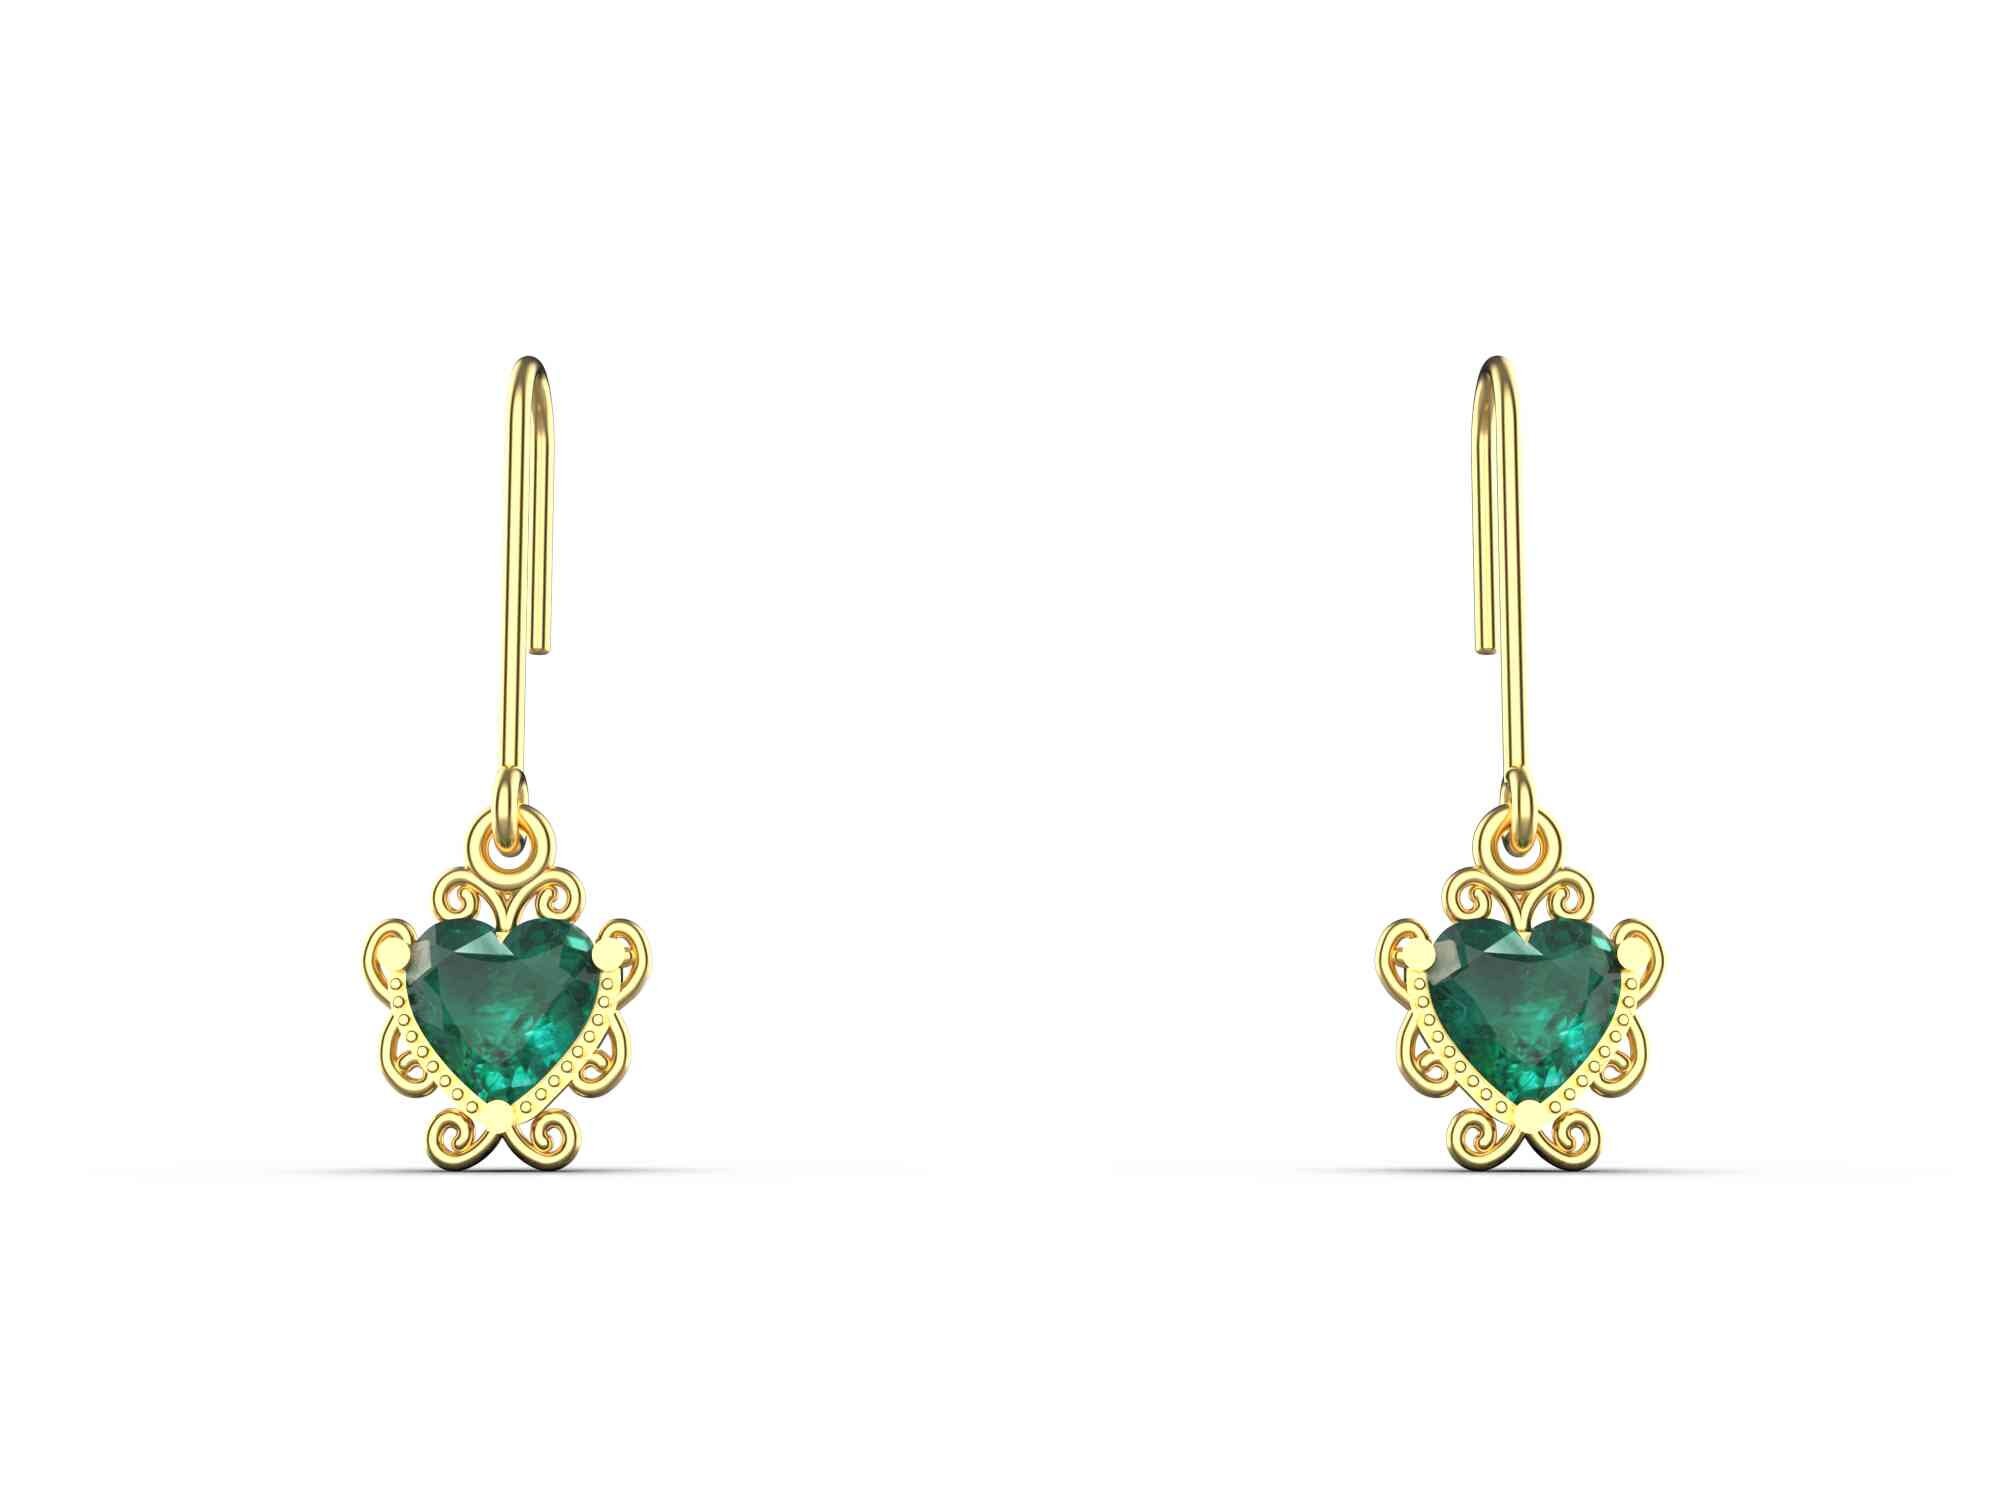 SPARKLD 9ct Yellow Gold Diamond and Emerald Heart Stud Earrings - Sparkld  from Personal Jewellery Service UK